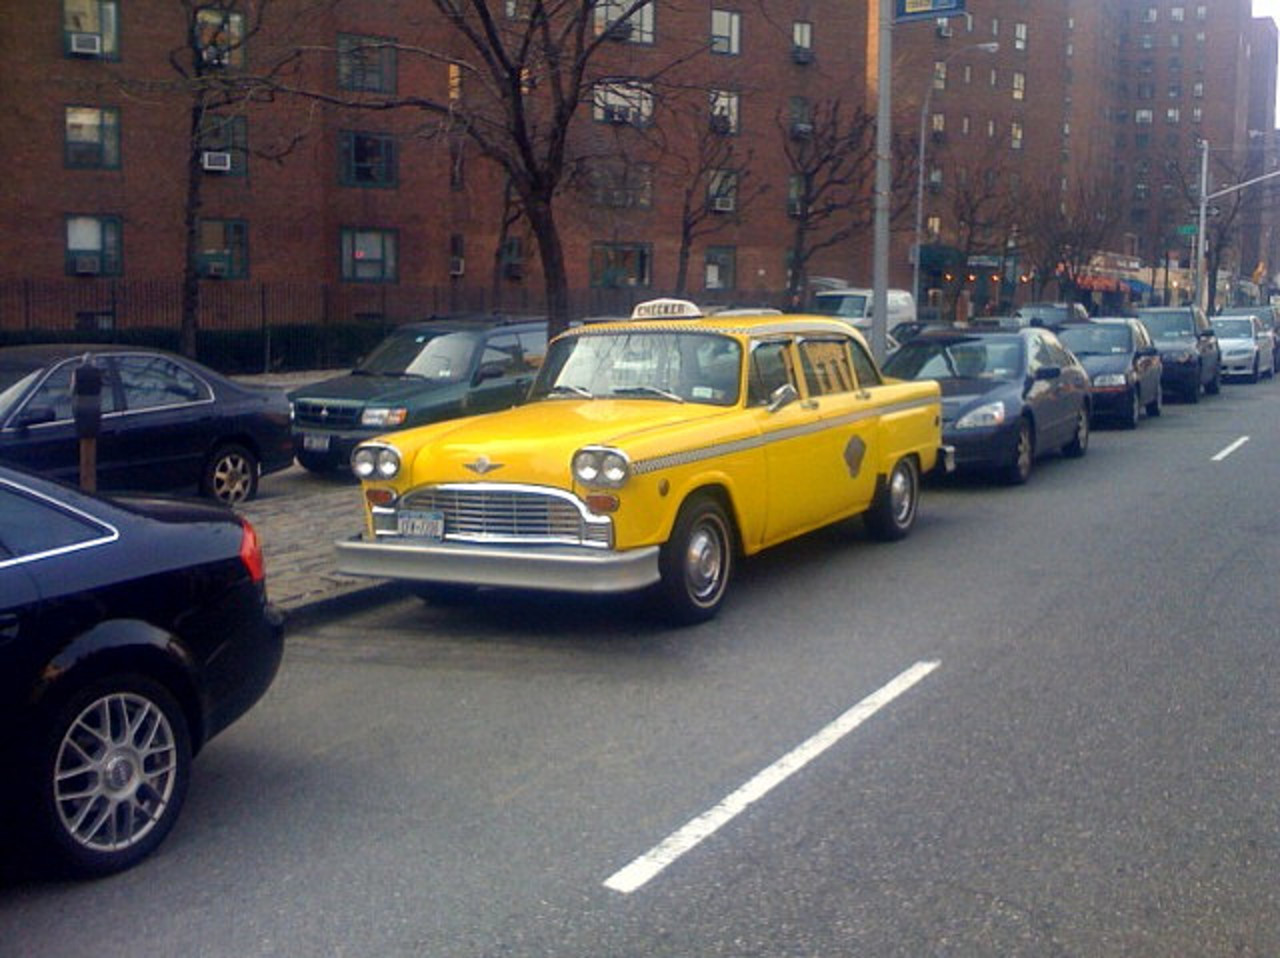 Taxi Cab - a gallery on Flickr